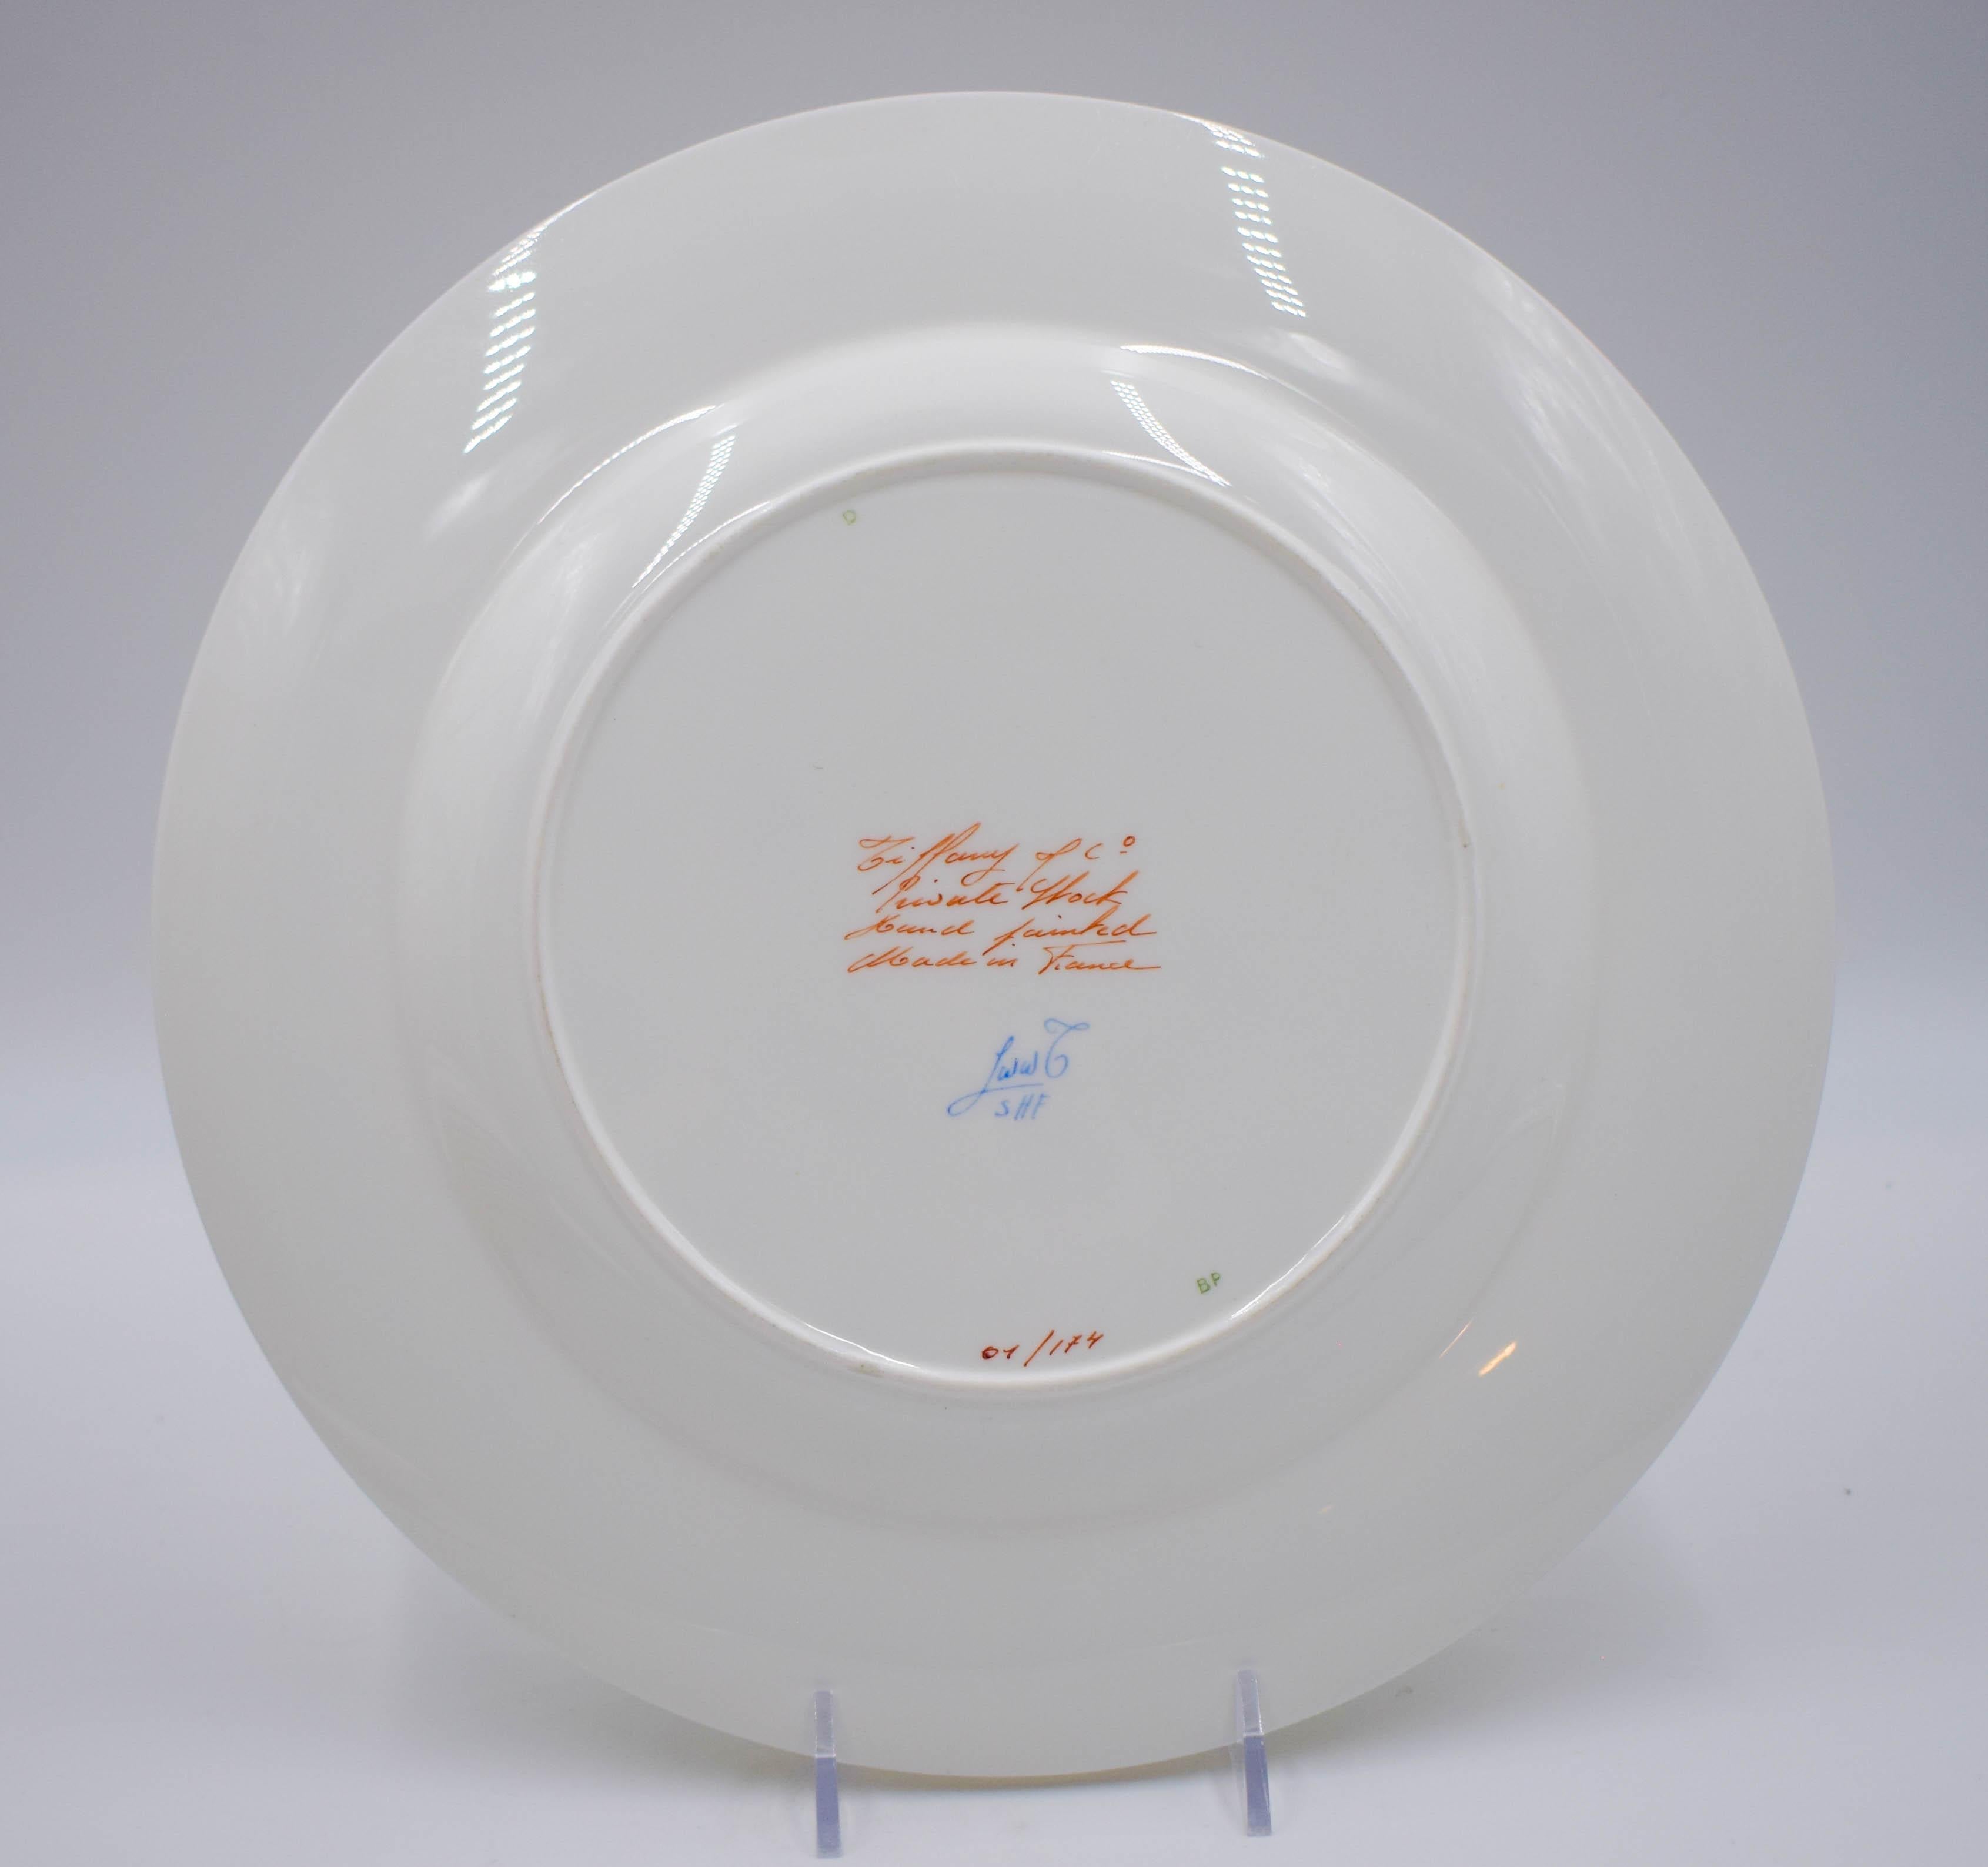 This set of twelve Tiffany Le Tallec Private Stock porcelain dinner plates was made for the prestigious luxury goods firm Tiffany & Co. Produced in France and dating to the mid-20th C., each plate is hand-painted with blue morning glories on a white